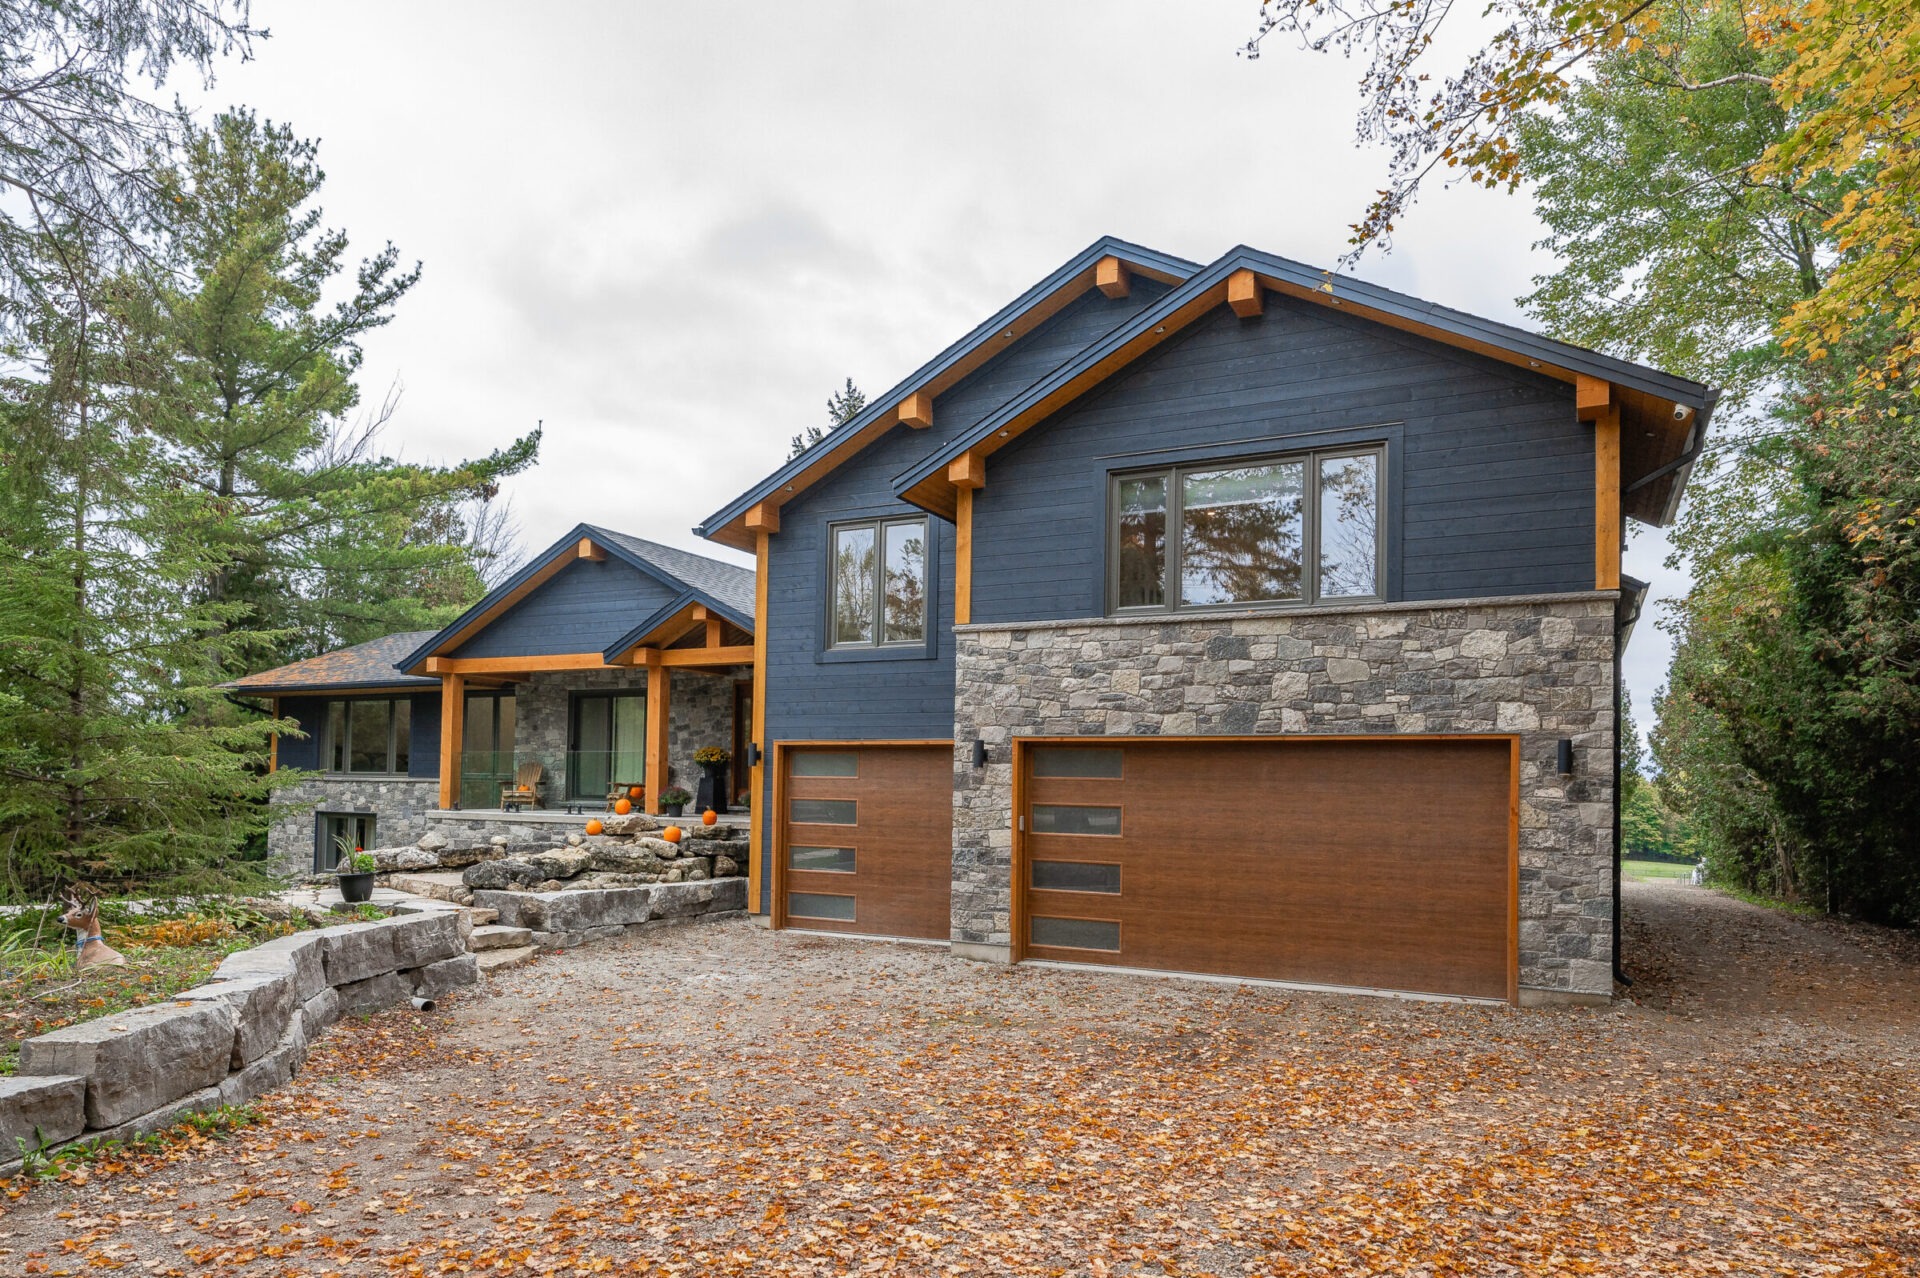 Modern house with dark blue siding, wooden accents, and stone foundation set in a wooded area during autumn with fallen leaves and seasonal decorations.